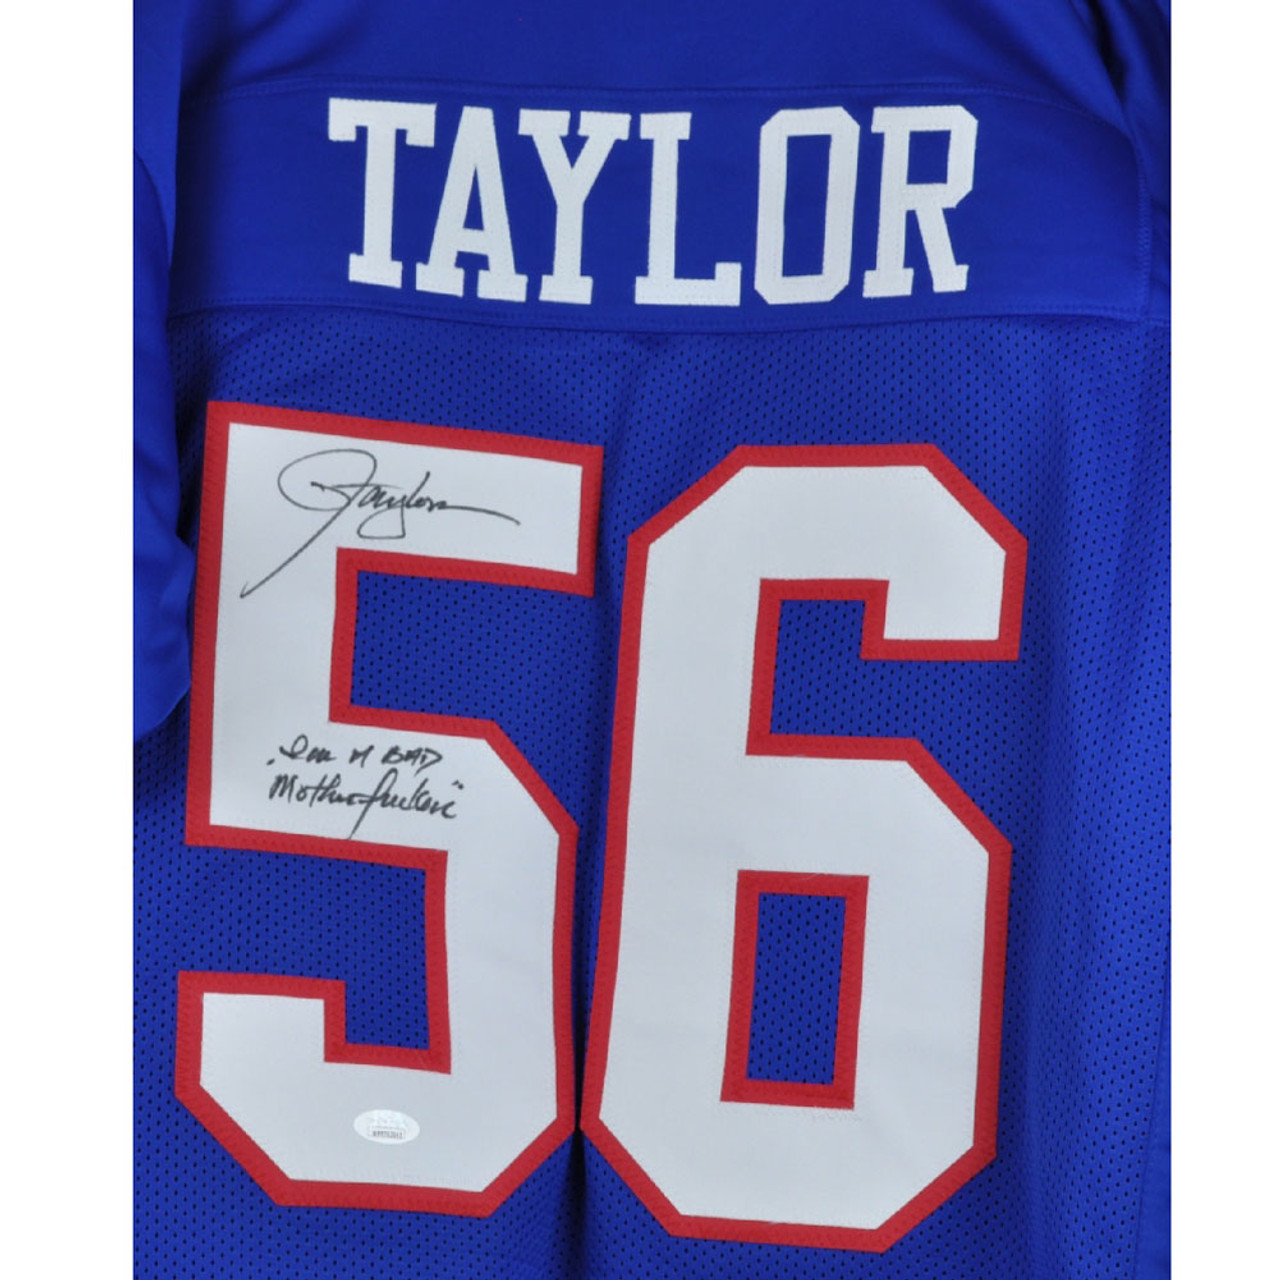 giants taylor jersey